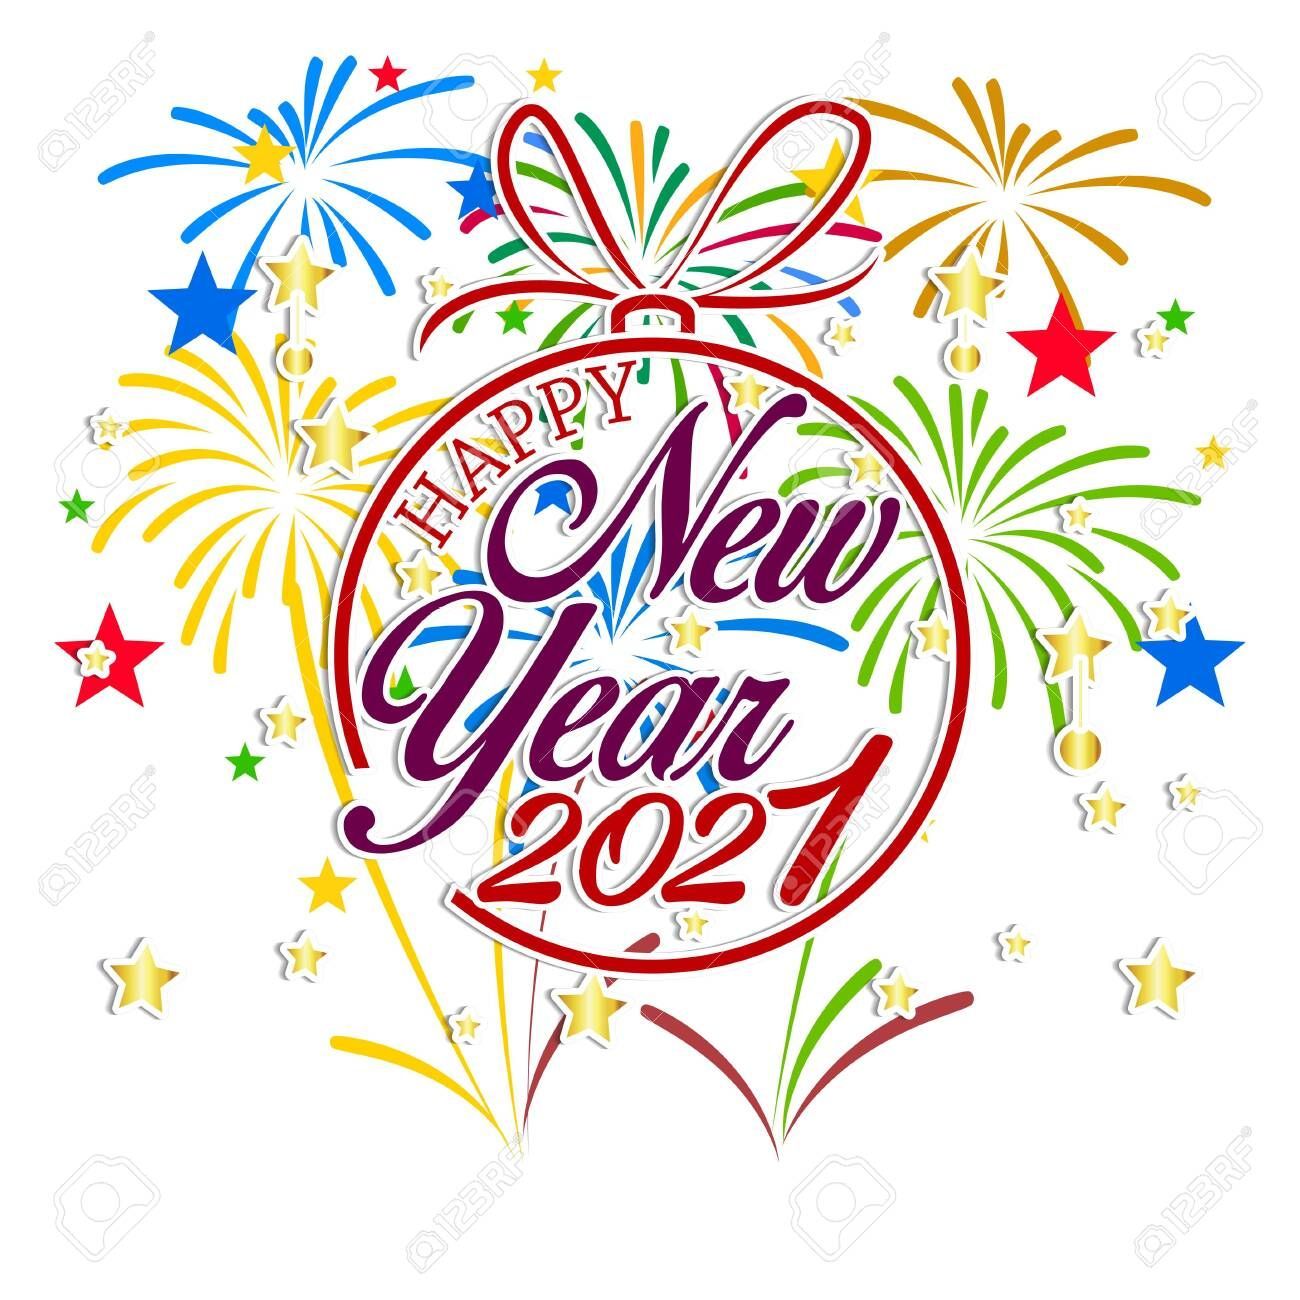 Funny New Year Wishes 2021 For Friends. Happy new year picture, Happy new year typography, Happy new year fireworks